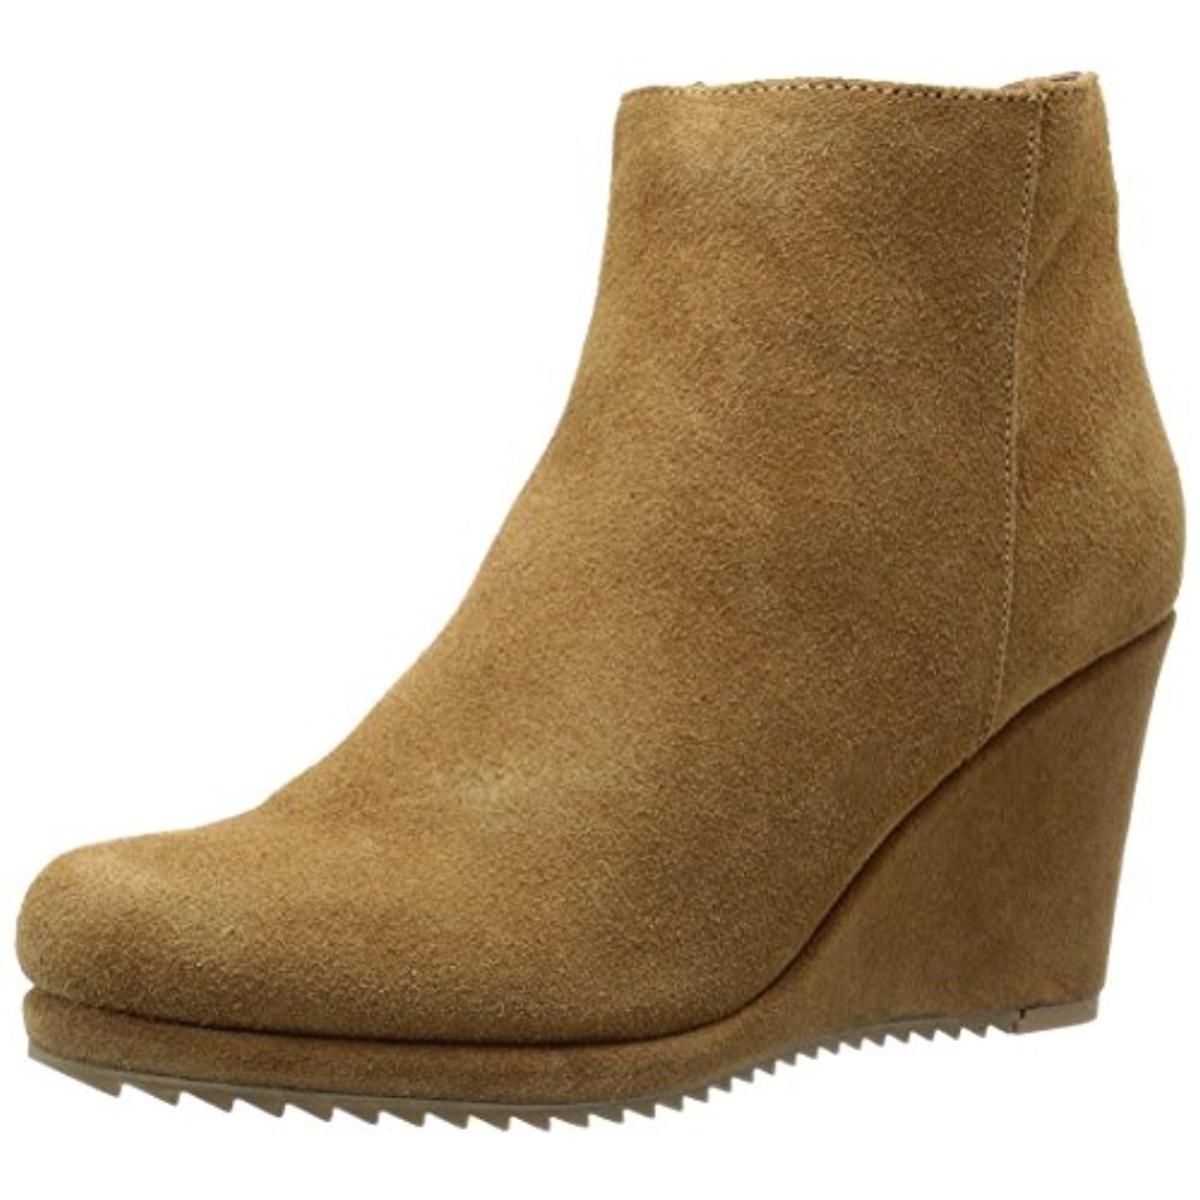 Dolce Vita 0597 Womens Piscal Suede Ankle Wedge Boots Shoes BHFO | eBay